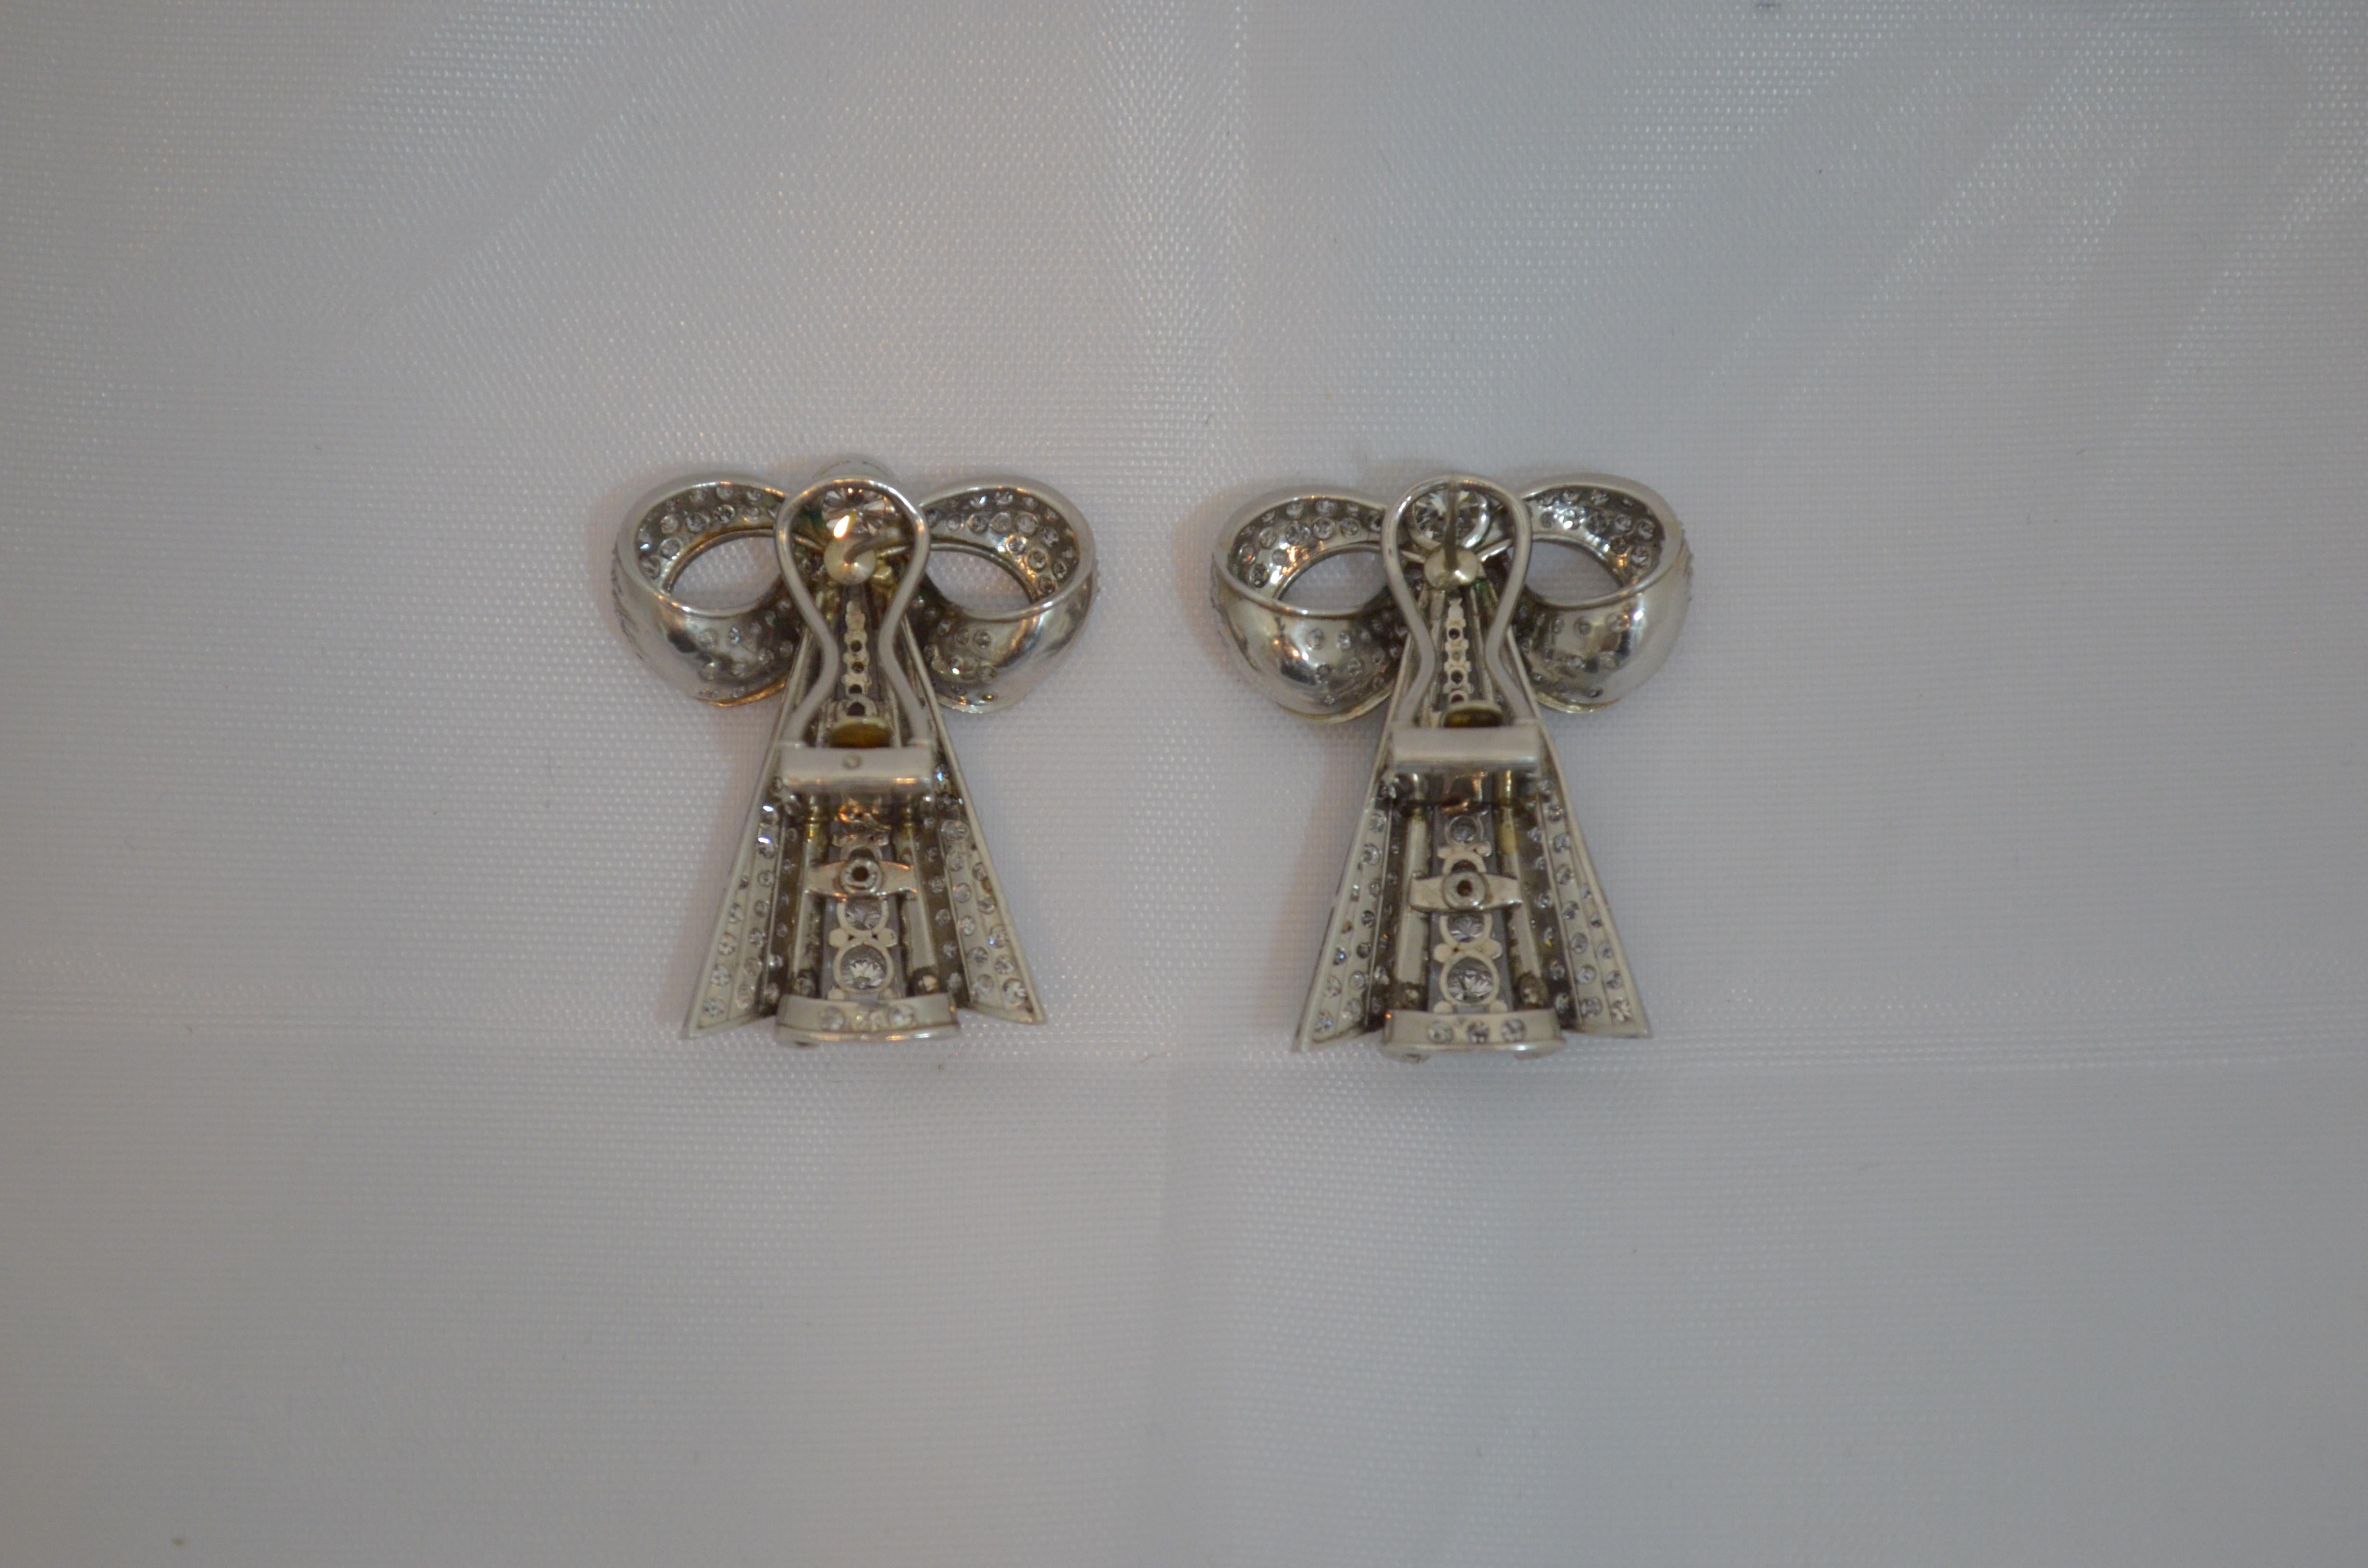 Art Deco/retro style bow earrings. Featured earrings are made from platinum and set with diamonds. The diamonds range from 5.5mm in size (bezel set) to 1mm (set pace style as well as prong set). The large center diamonds are a round brilliant cut